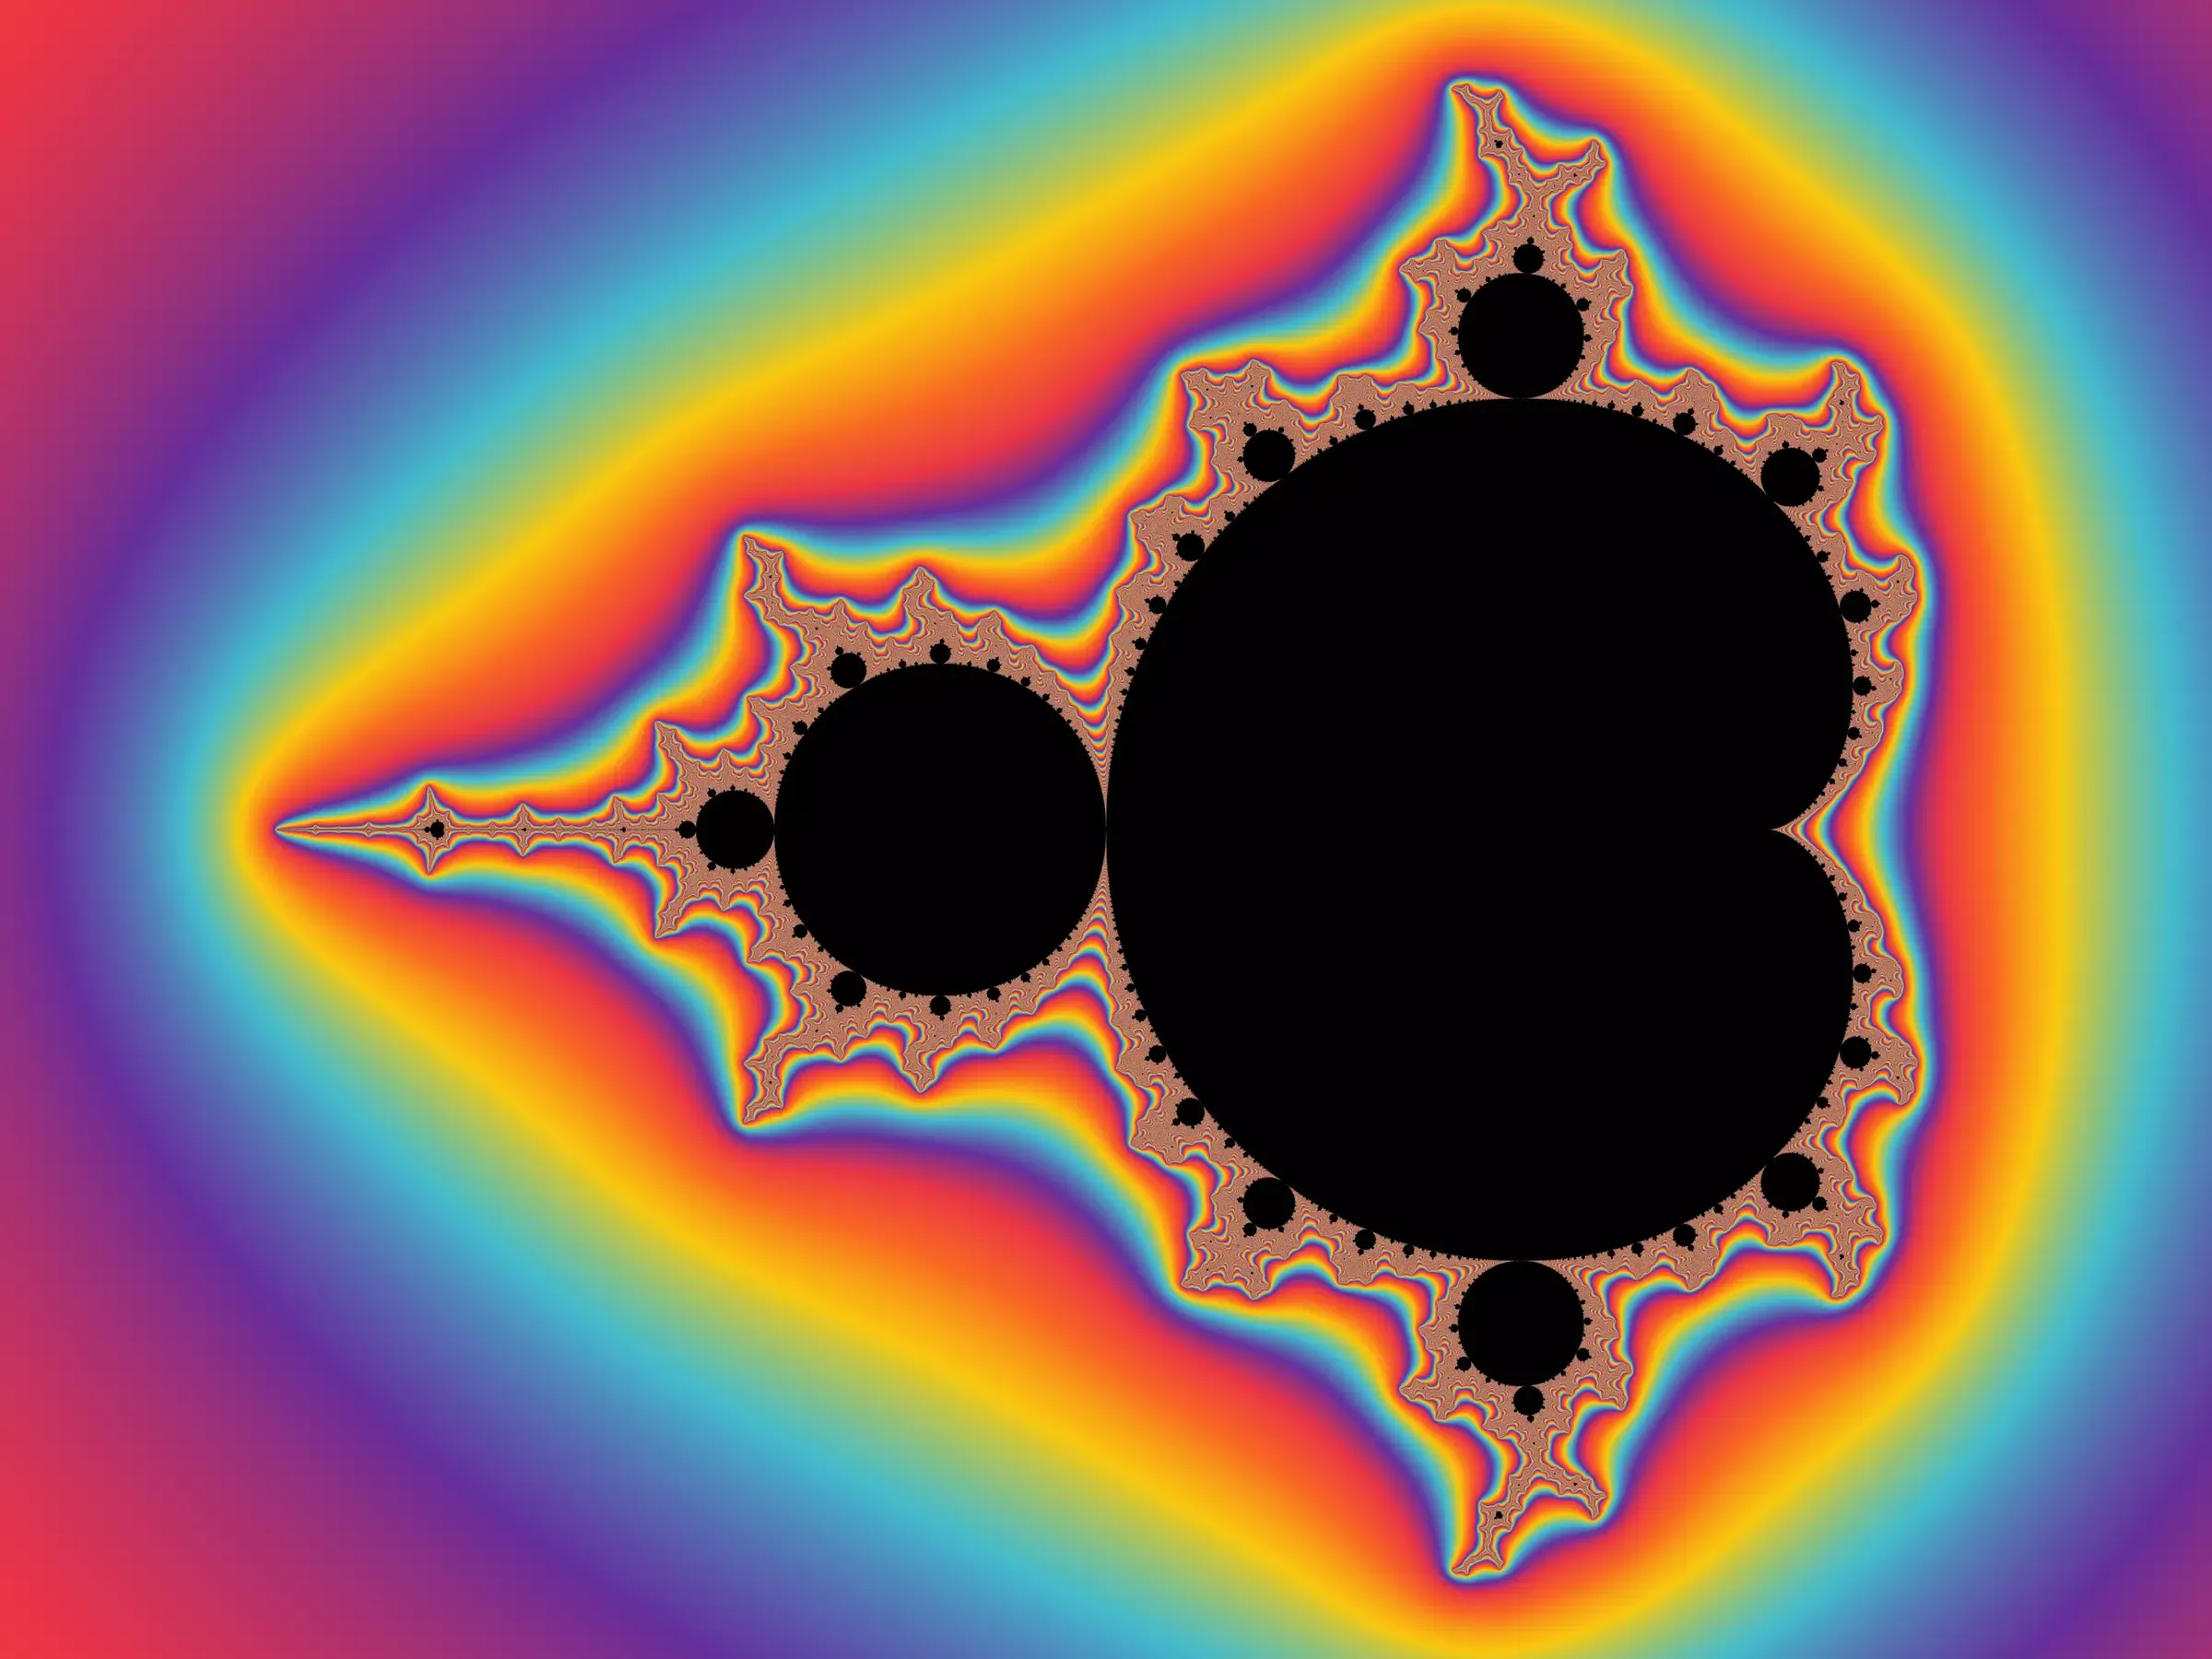 Rendering Fractals From Scratch